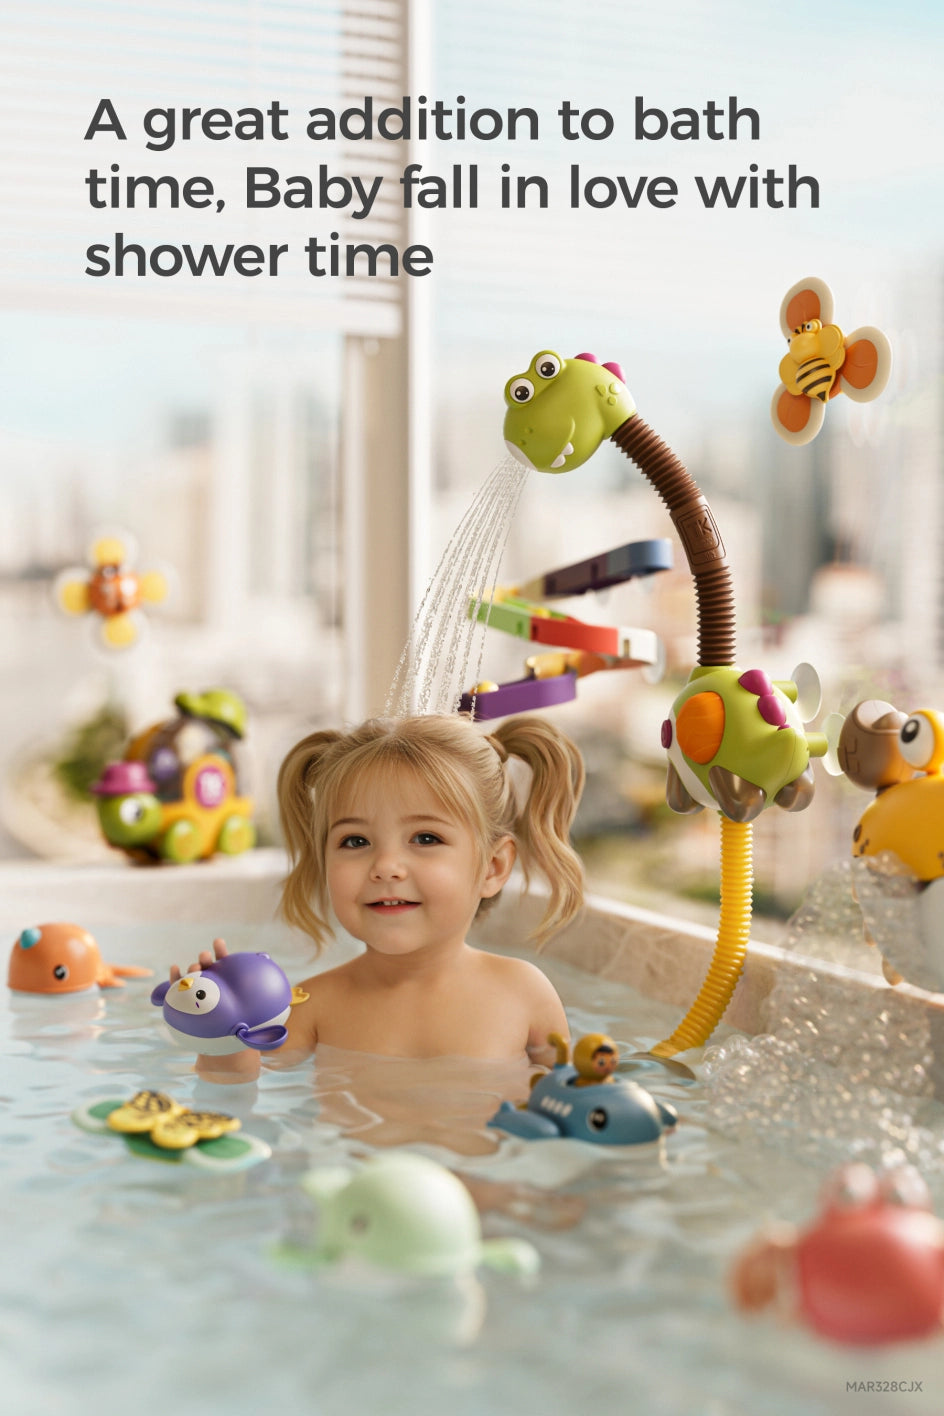 Baby bath with wind up spinning toy a great addition to bath time